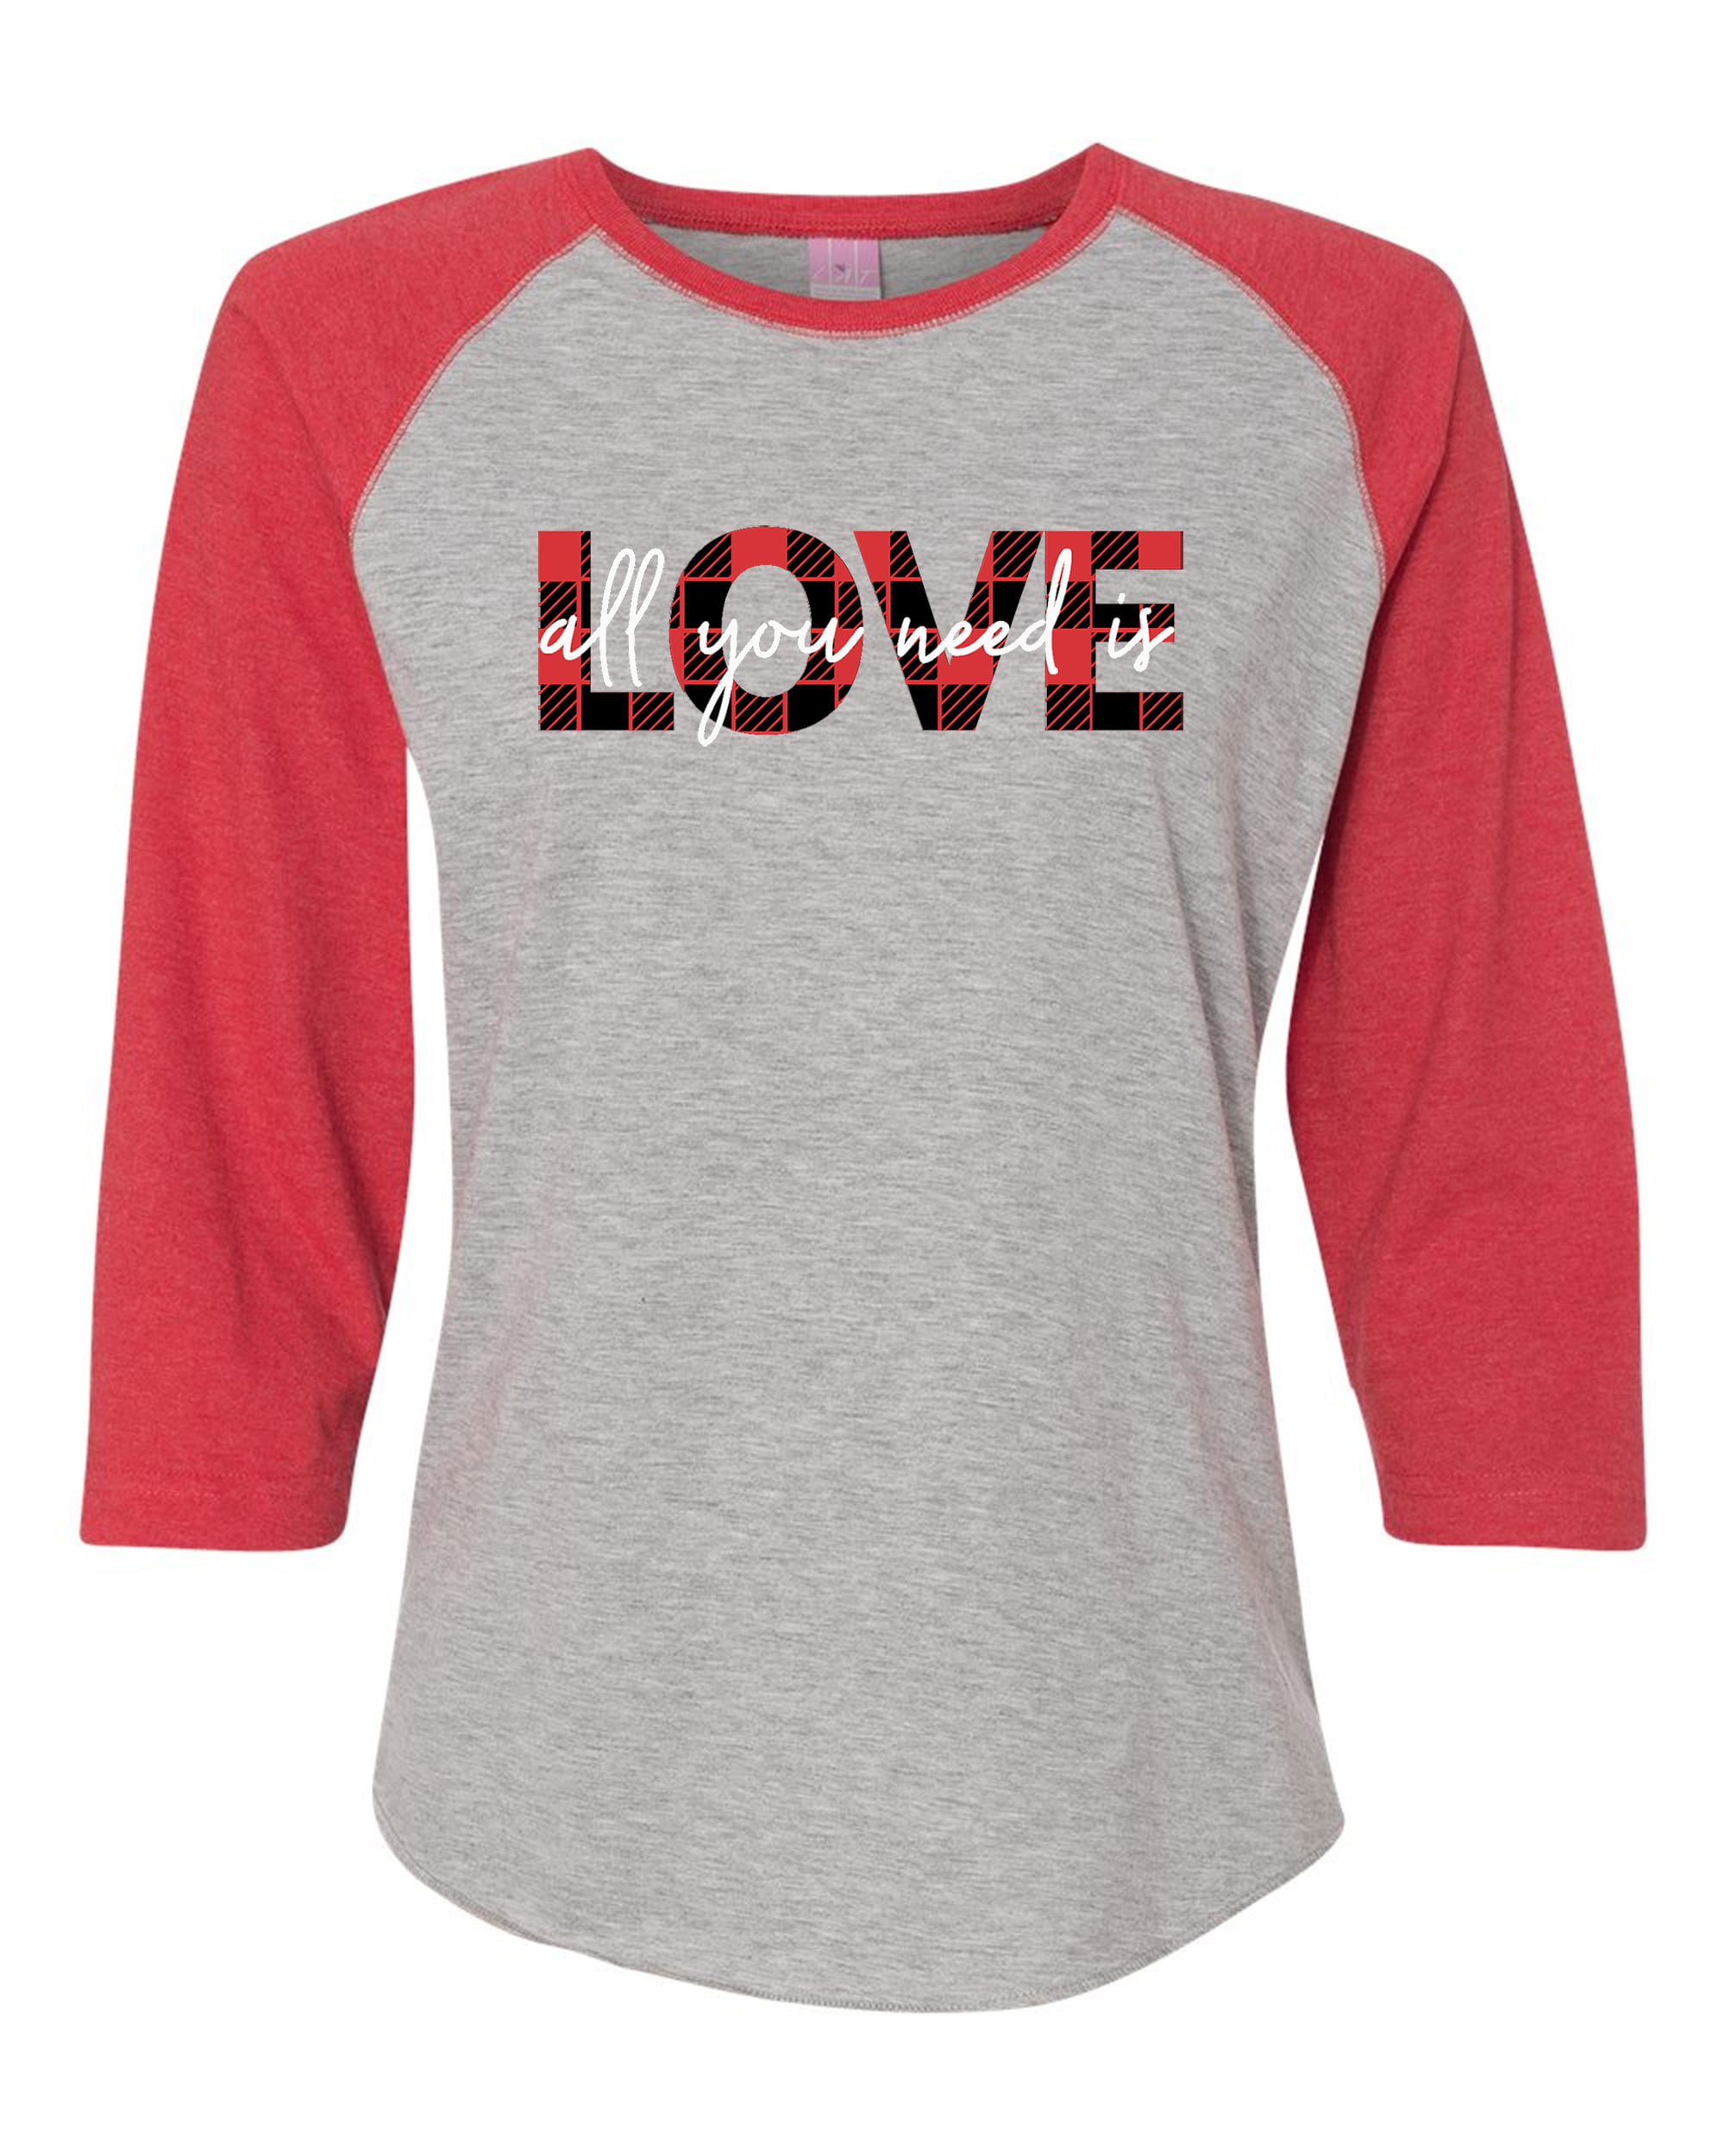 I Love You Gifts for Her Valentines Day Shirt Love T Shirt Women Pastry Shirts I Love You from the Bottom of My Heart Shirt Black